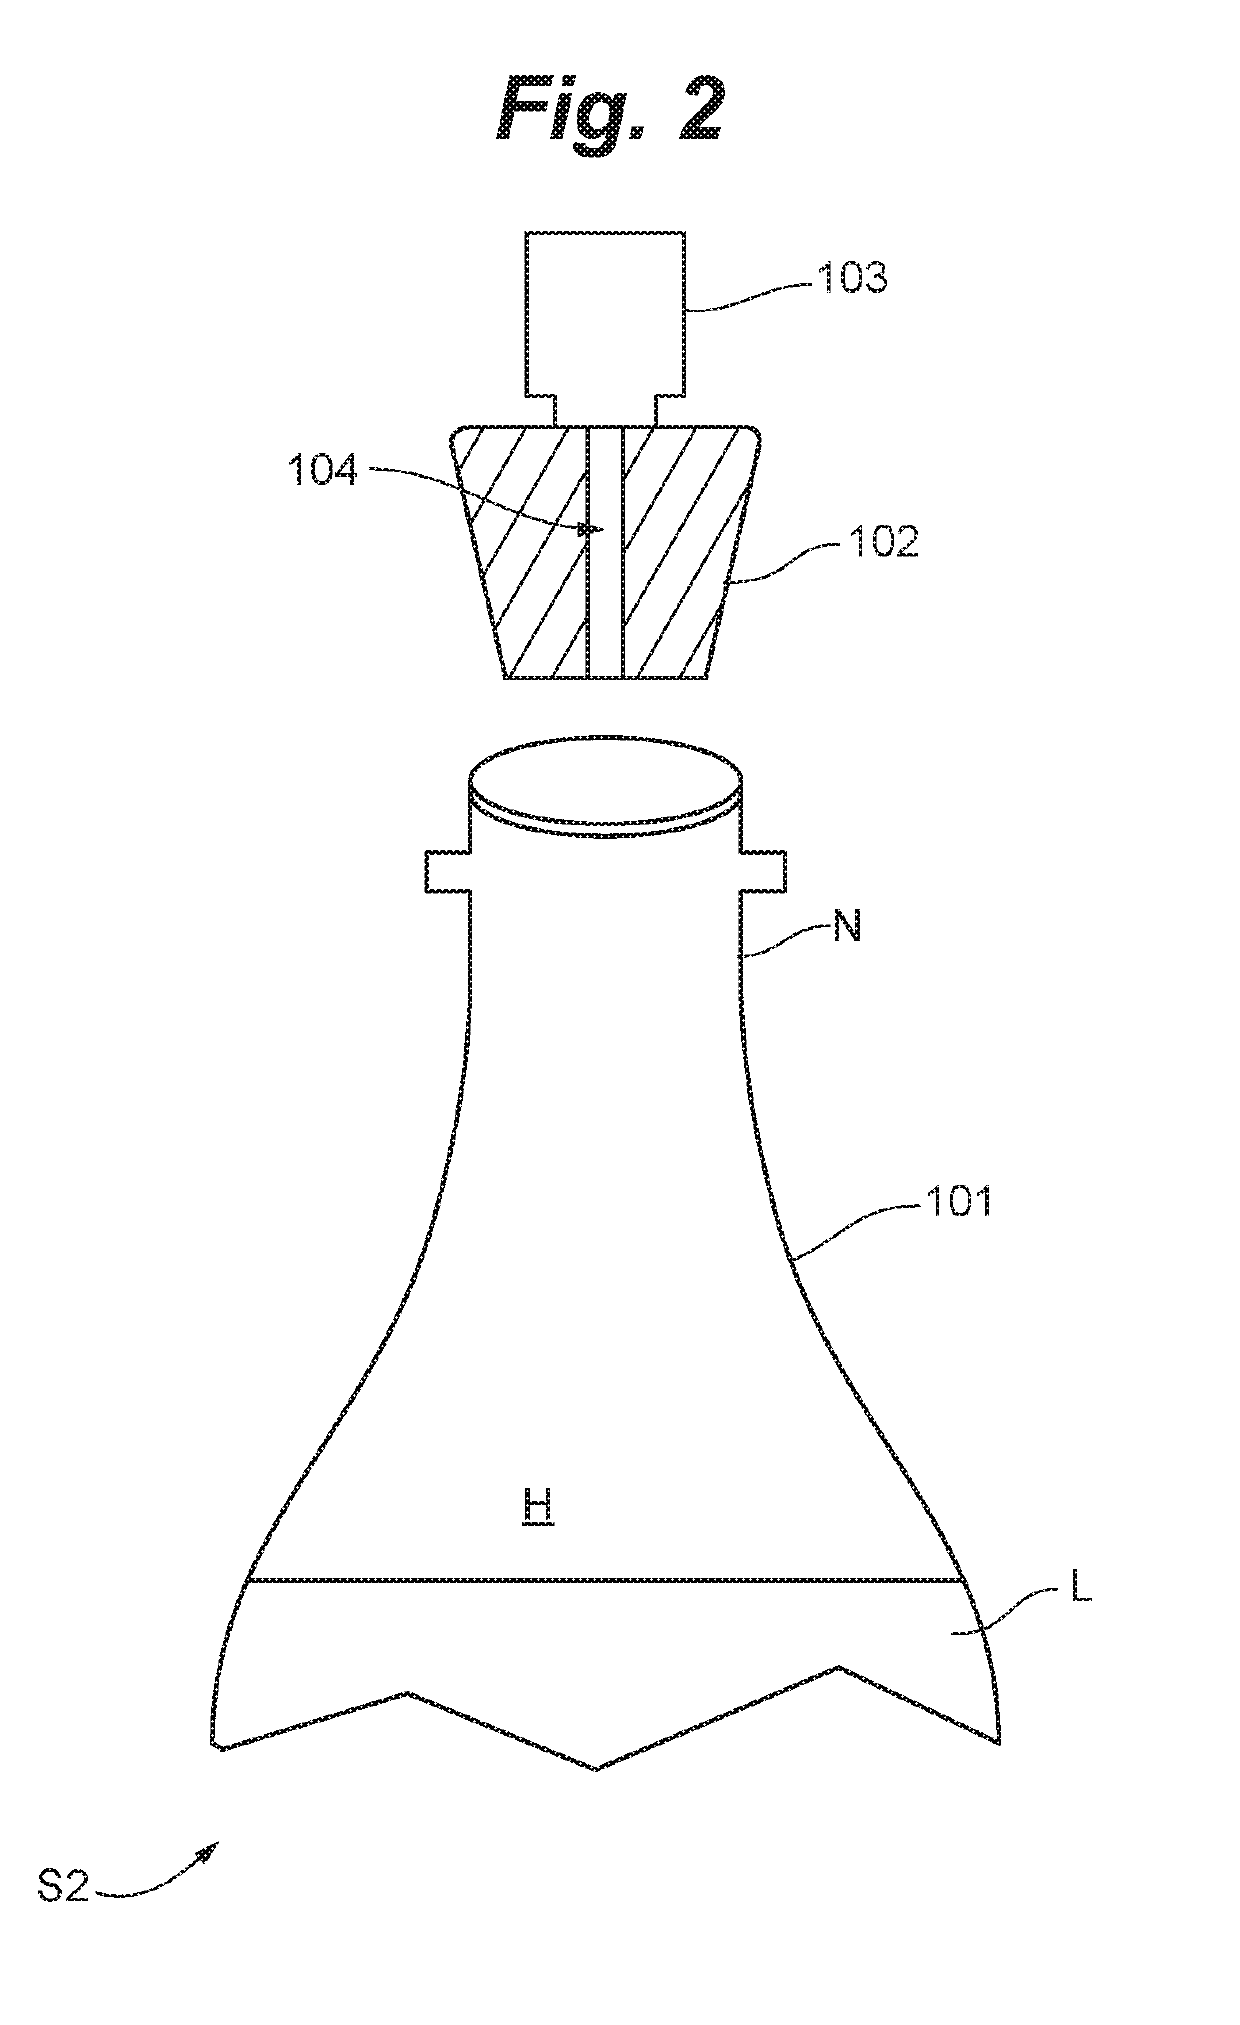 Systems and methods for de-oxygenation of a closed container